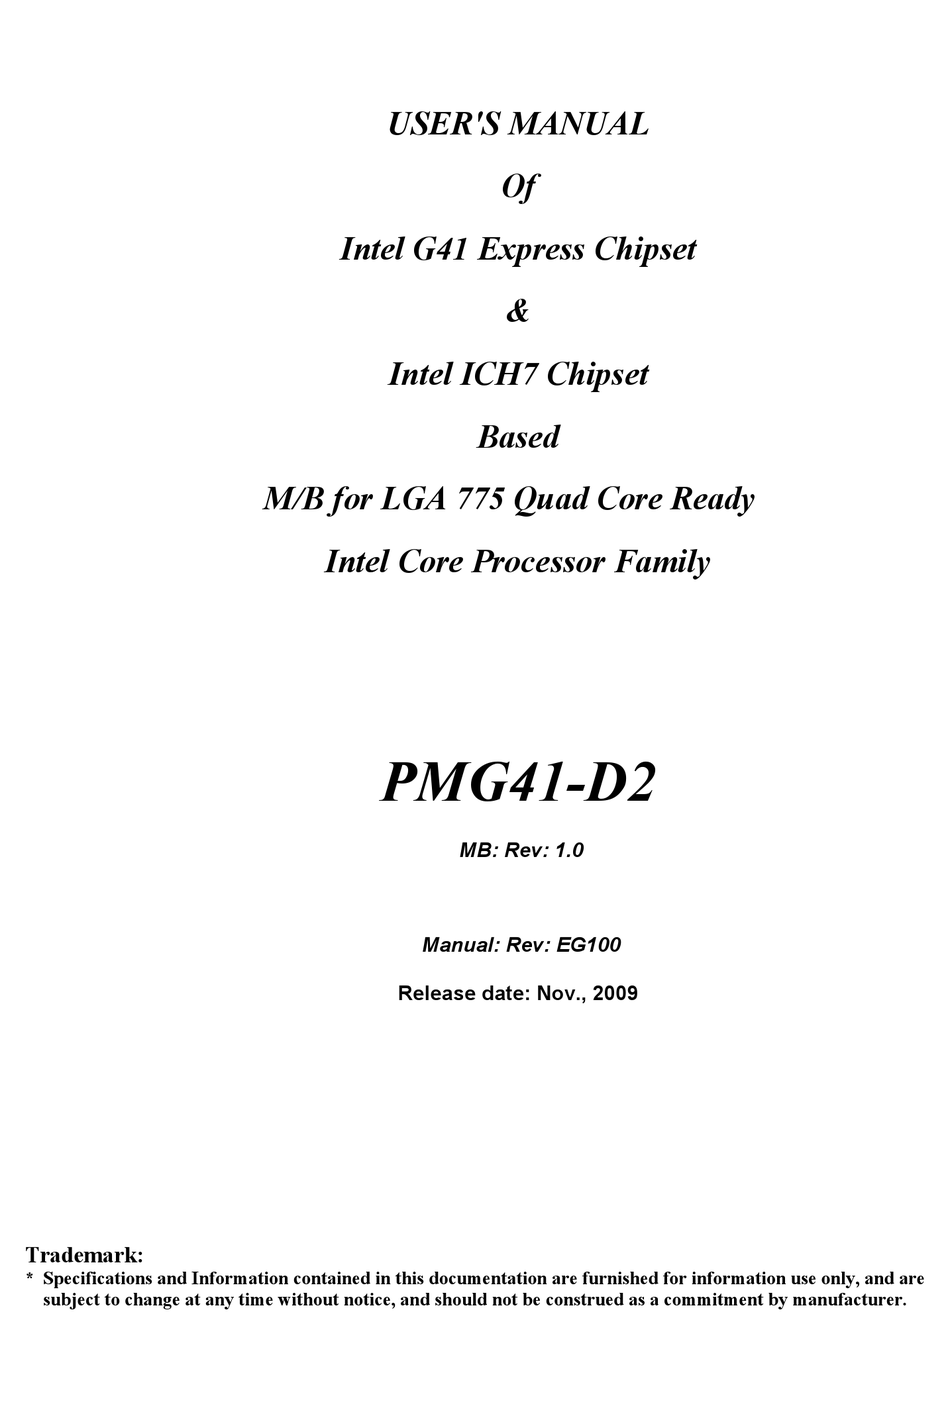 Circuit Diagram And Description Of Motherboard Intel G41 Express